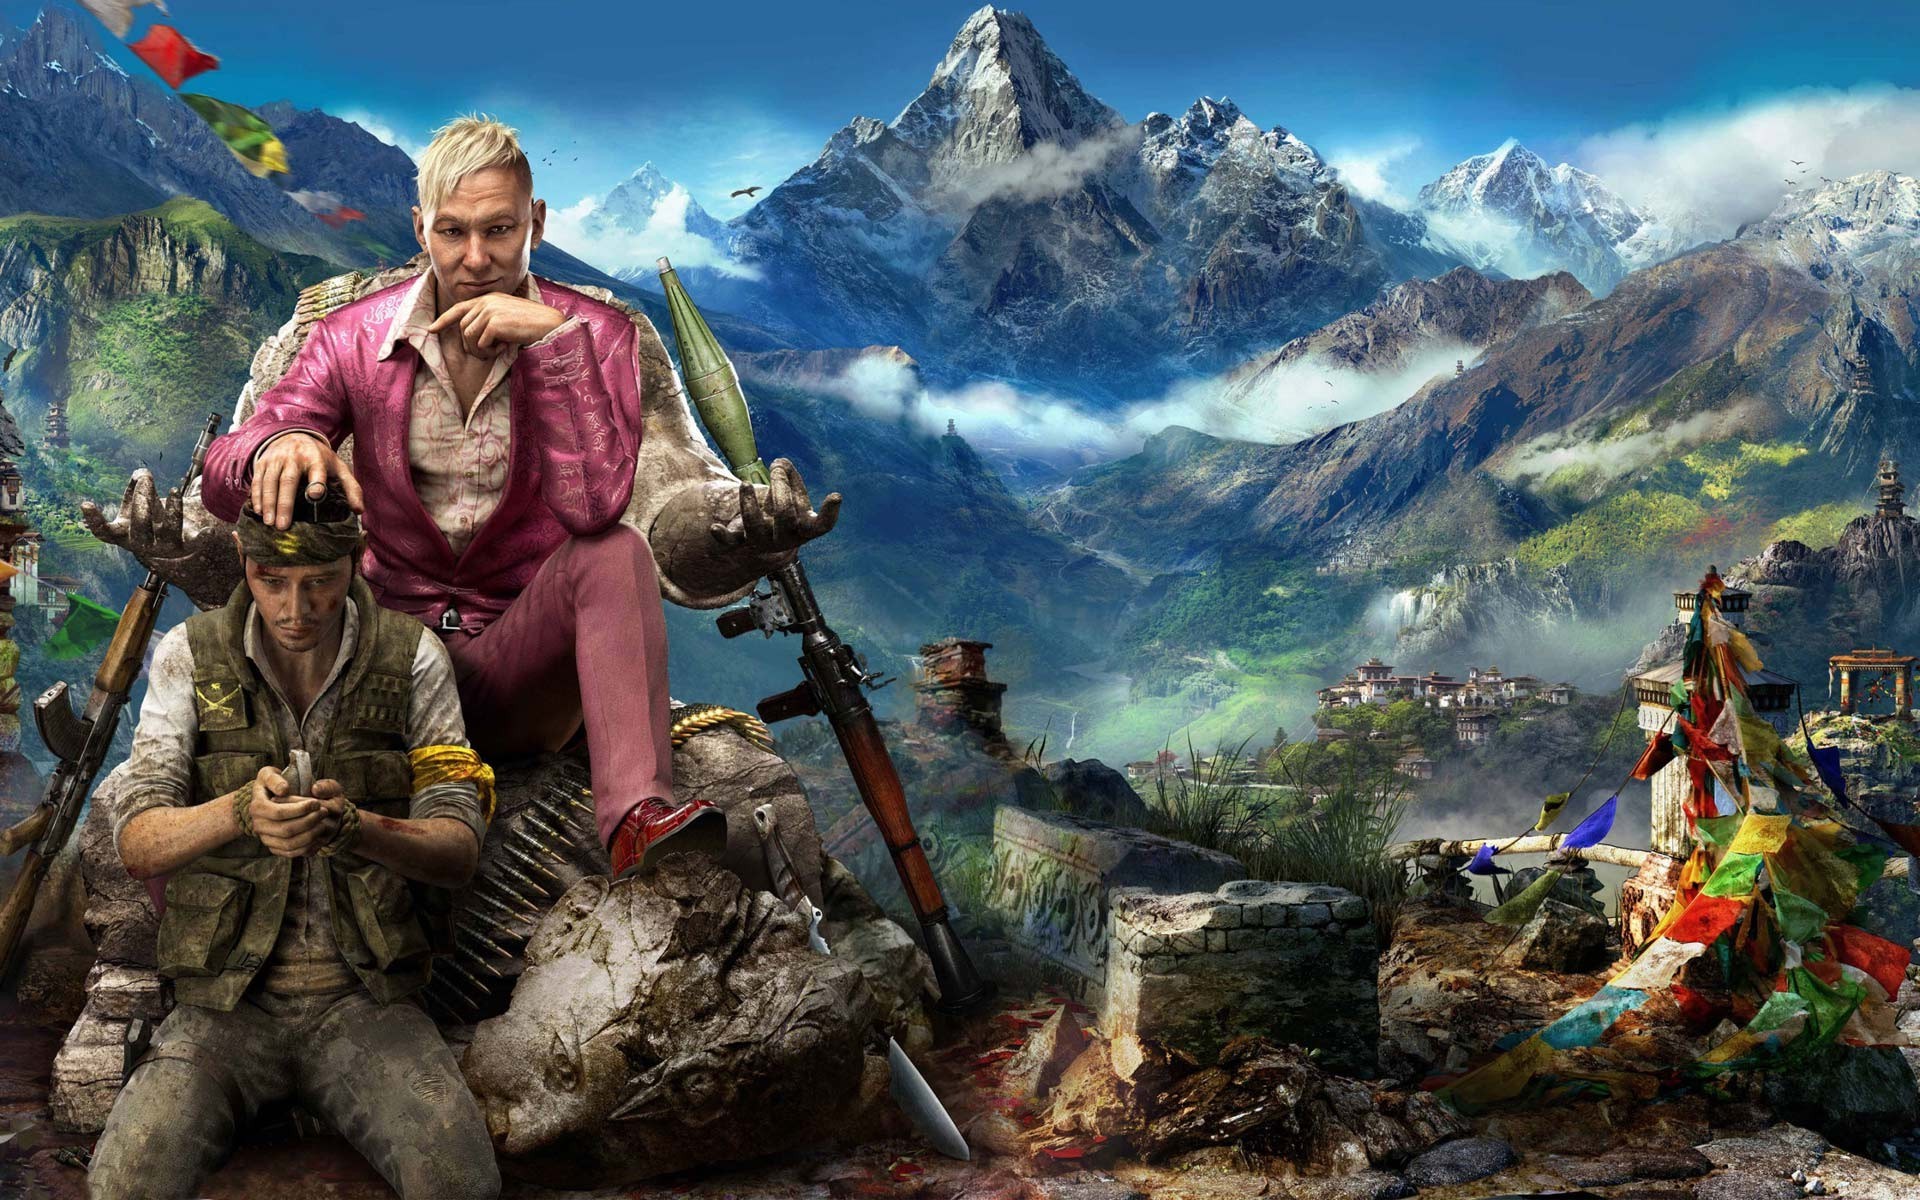 far cry 4 video games xbox 360 playstation 4 wallpapers hd desktop and mobile backgrounds video games xbox 360 playstation 4